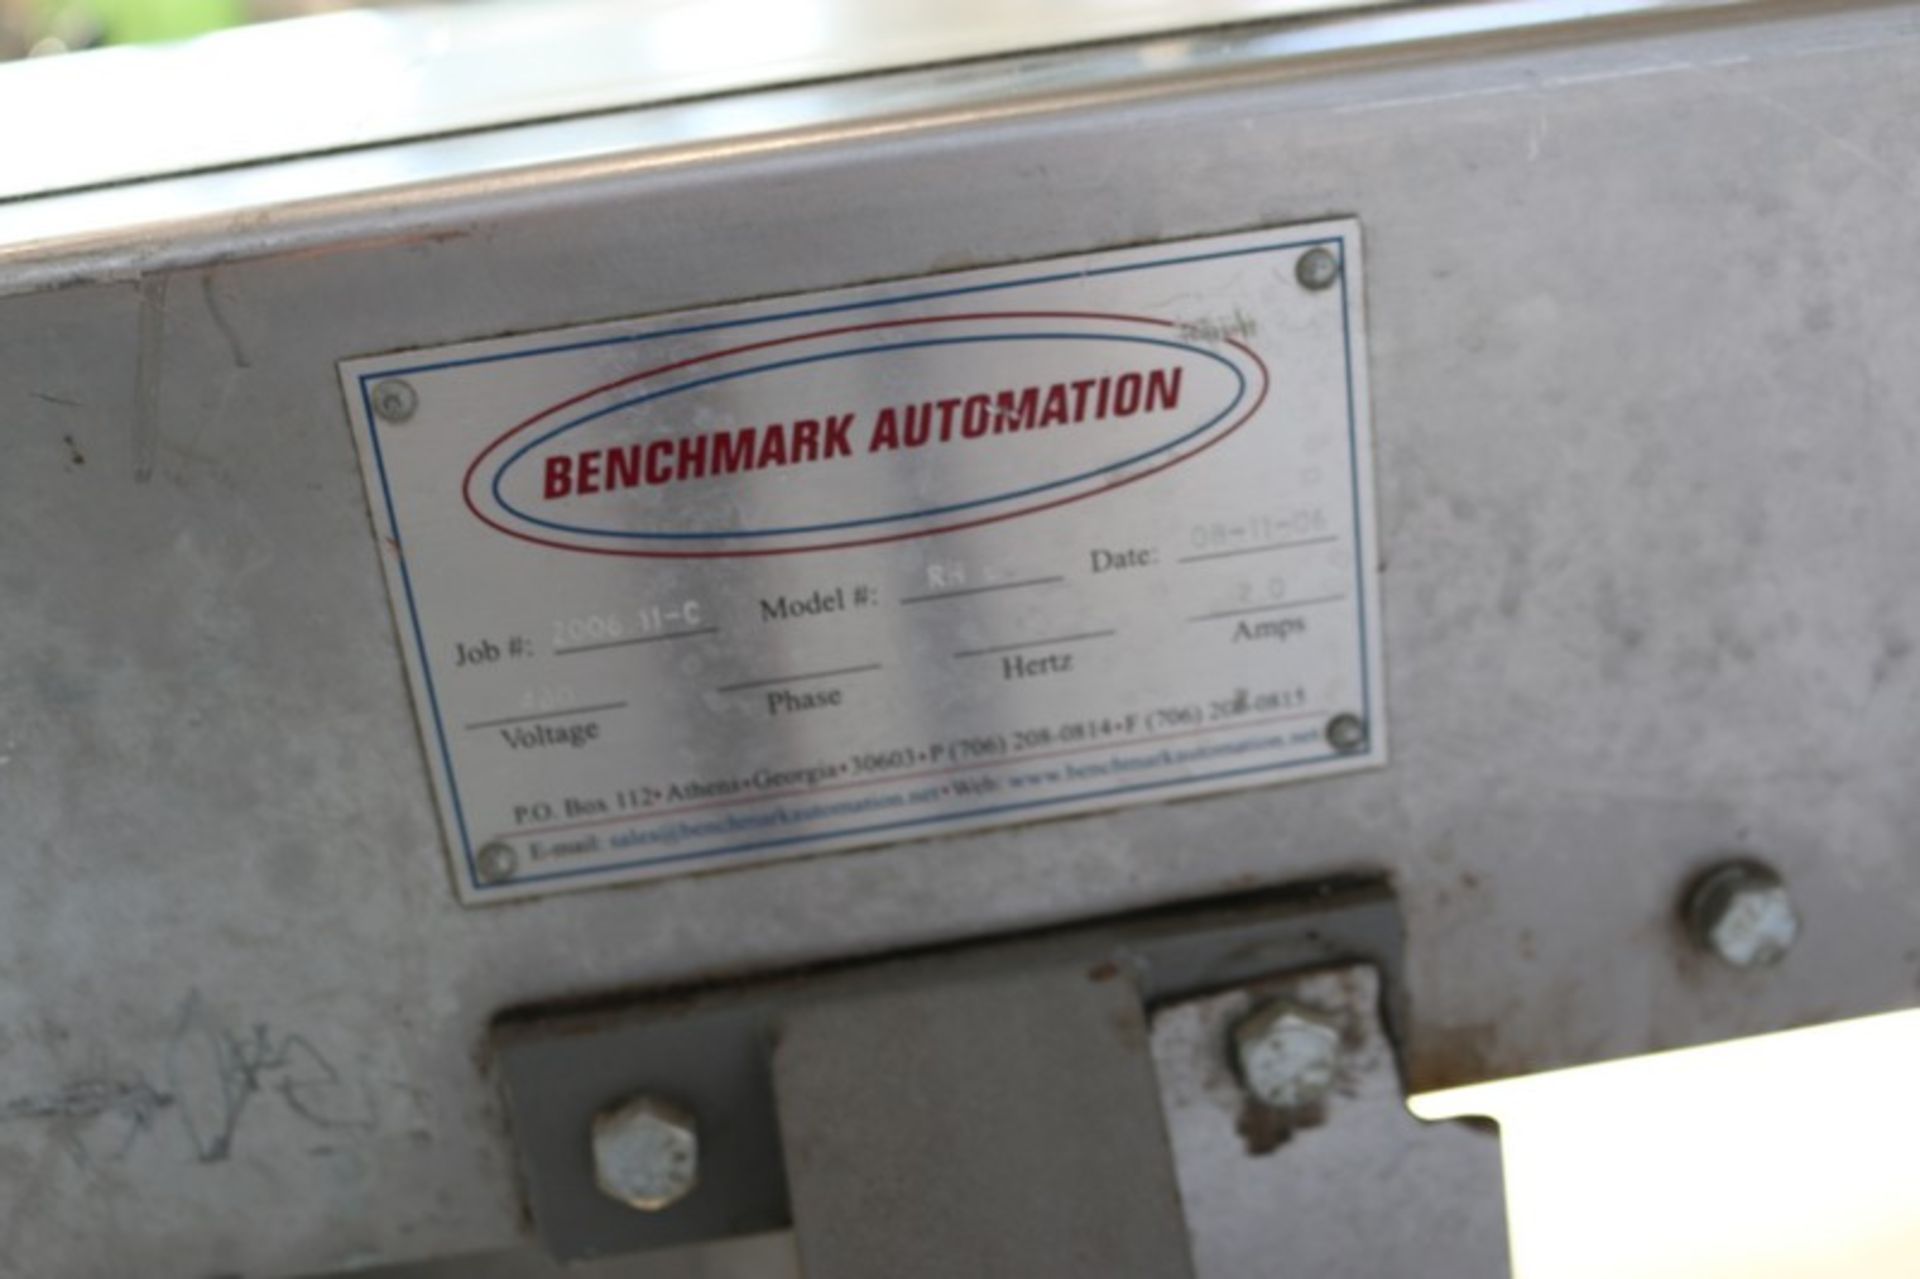 Benchmark Automation S/S Conveyor,M/N RH BC, Job #: 2006 11-C, 480 Volts, 3 Phase, Aprox. 72" L with - Image 9 of 10